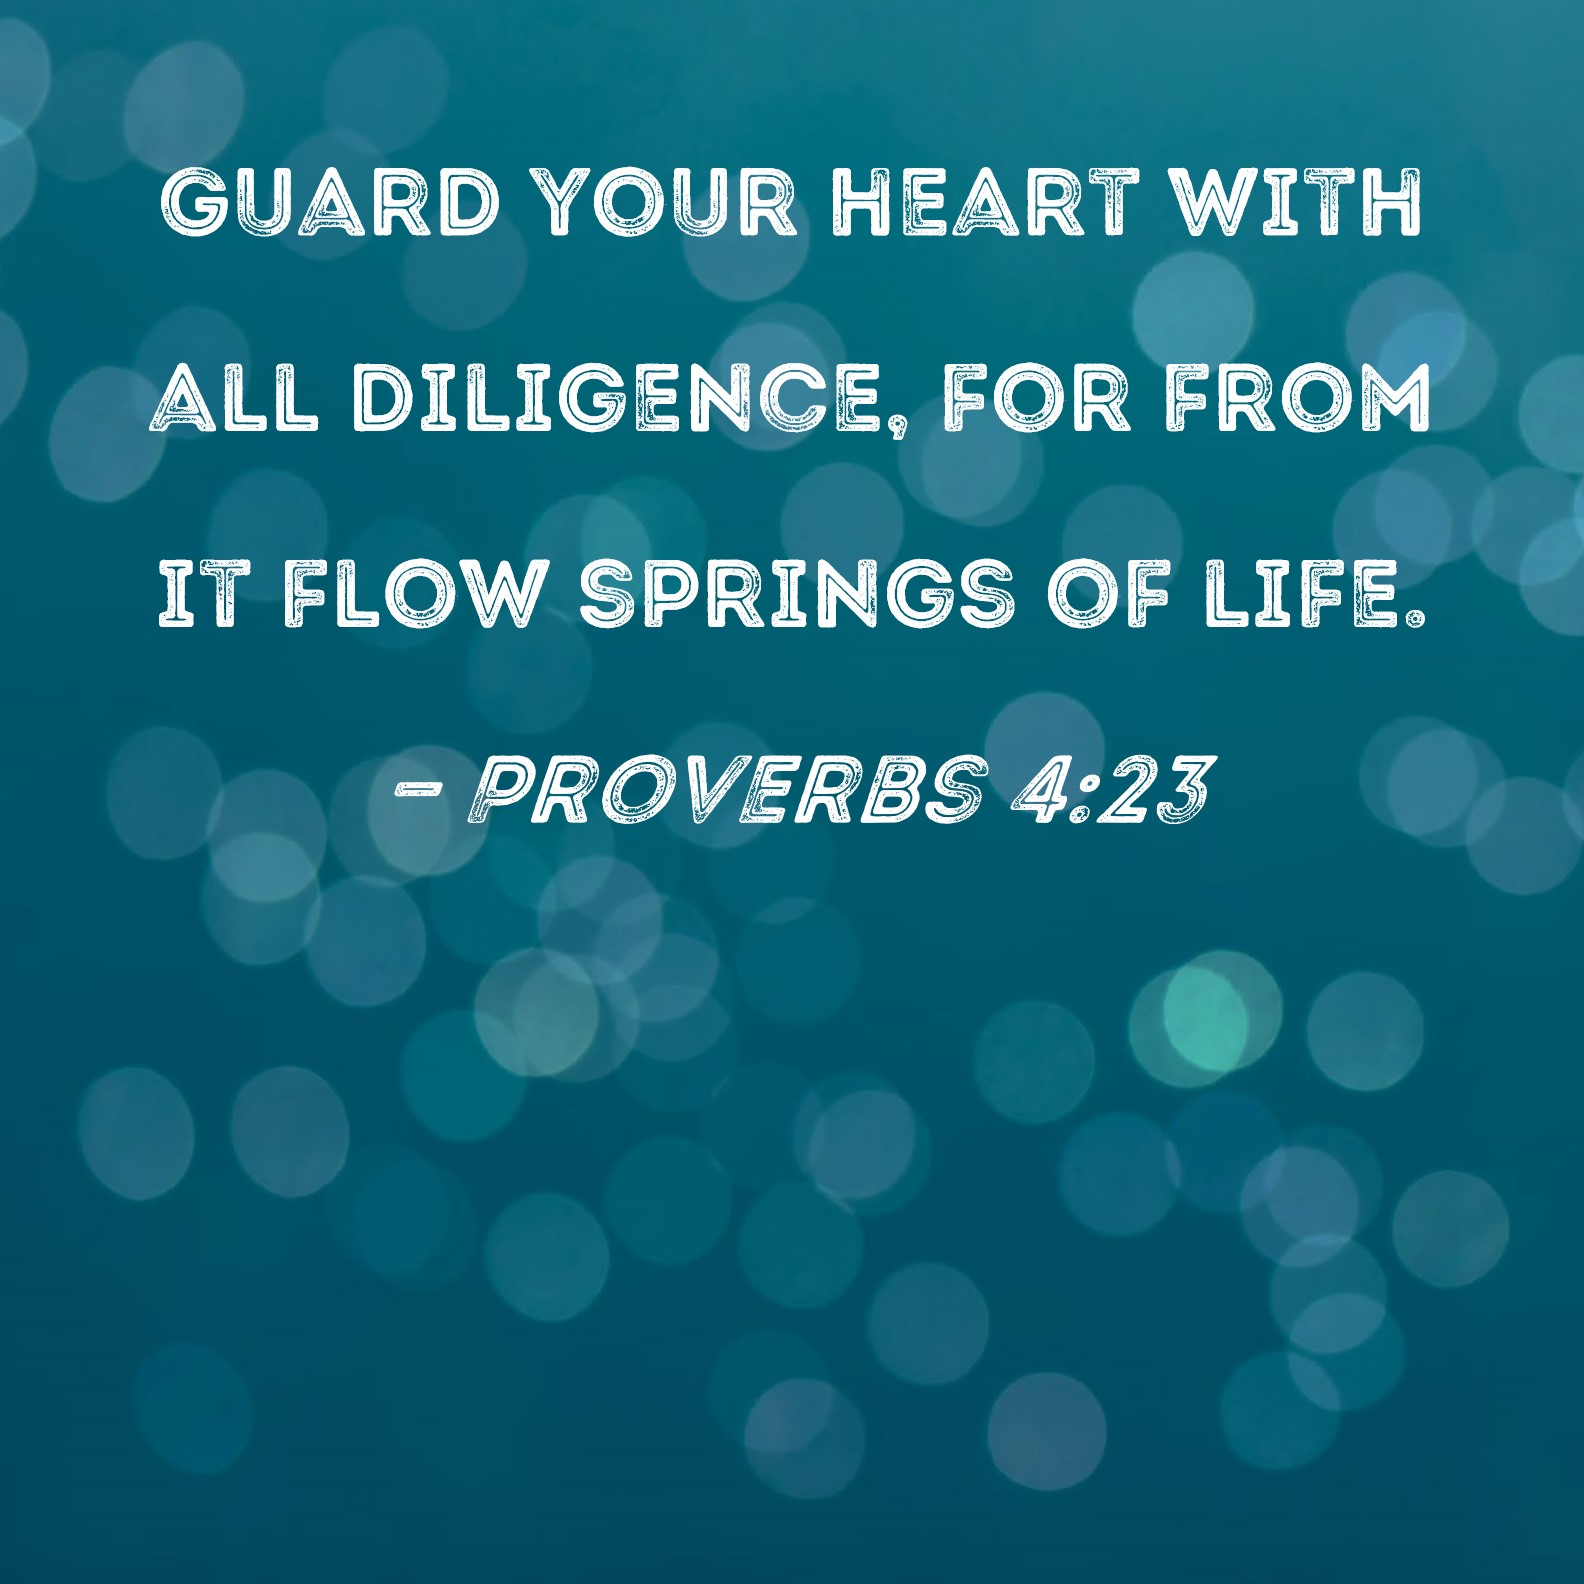 Proverbs 4:23 Guard your heart with all diligence, for from it flow springs  of life.